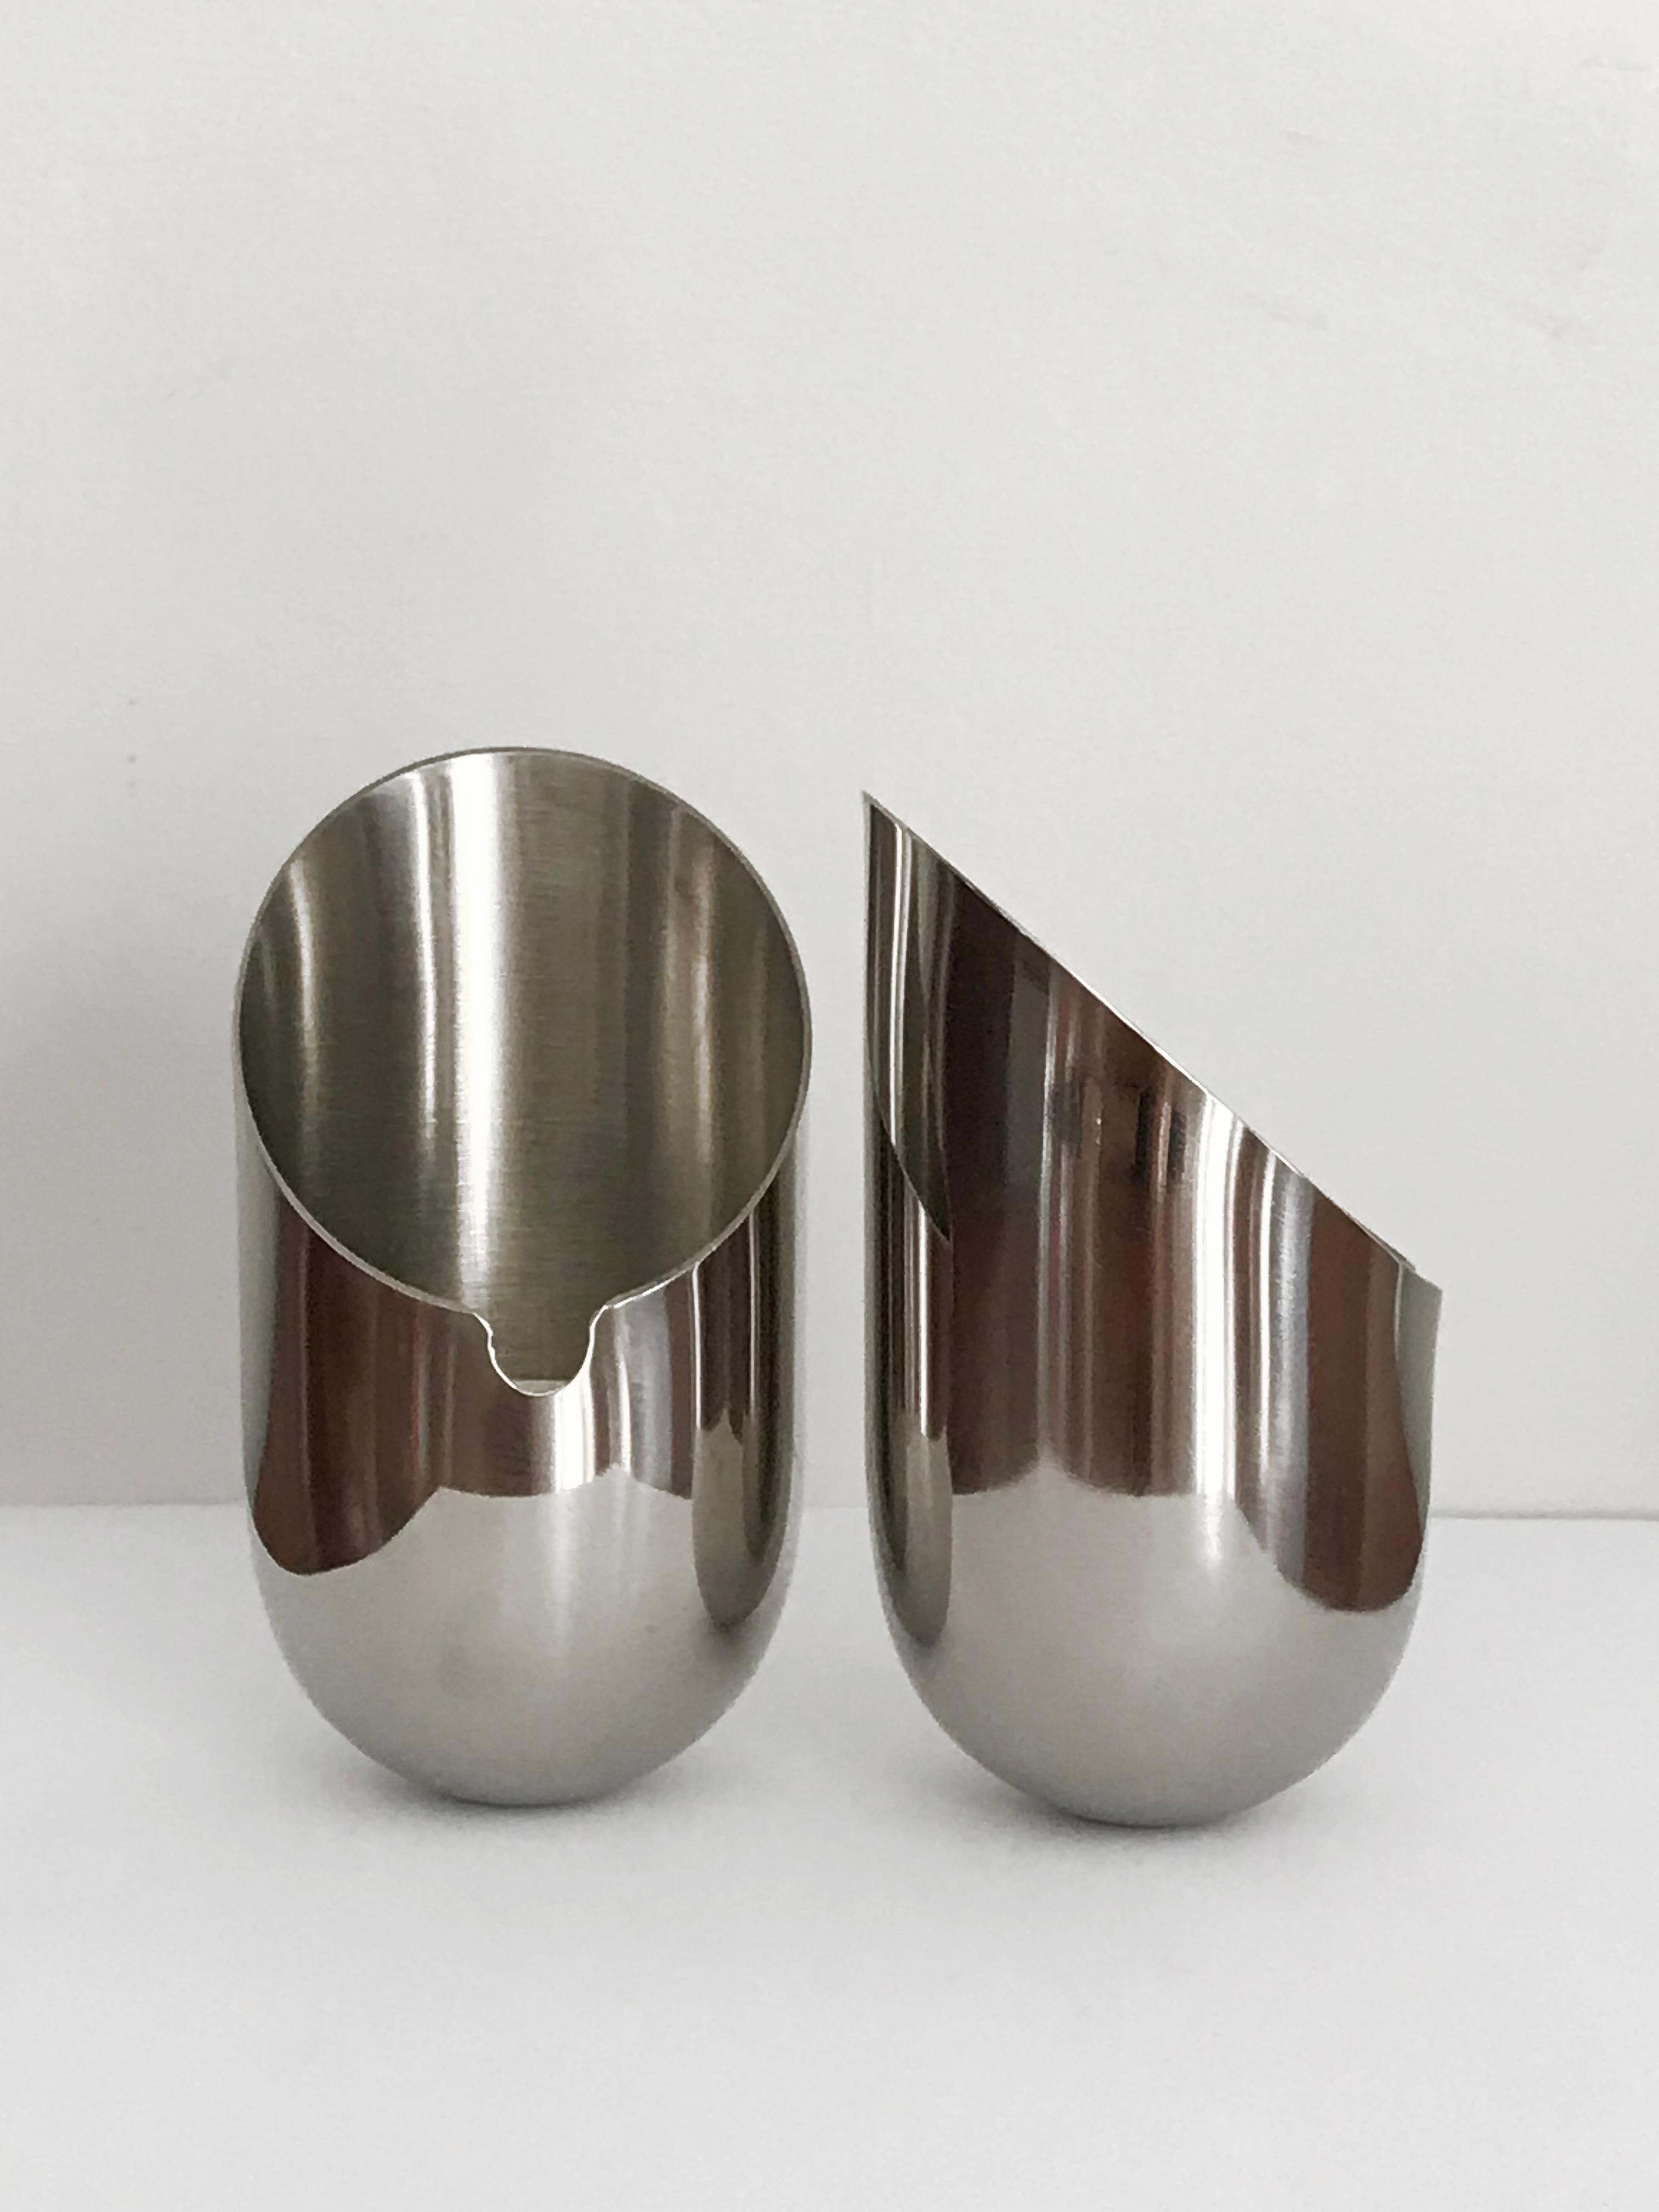 Stainless Steel Birillo Italian Steel Ashtrays by E. Didone for Valenti, 1970 For Sale